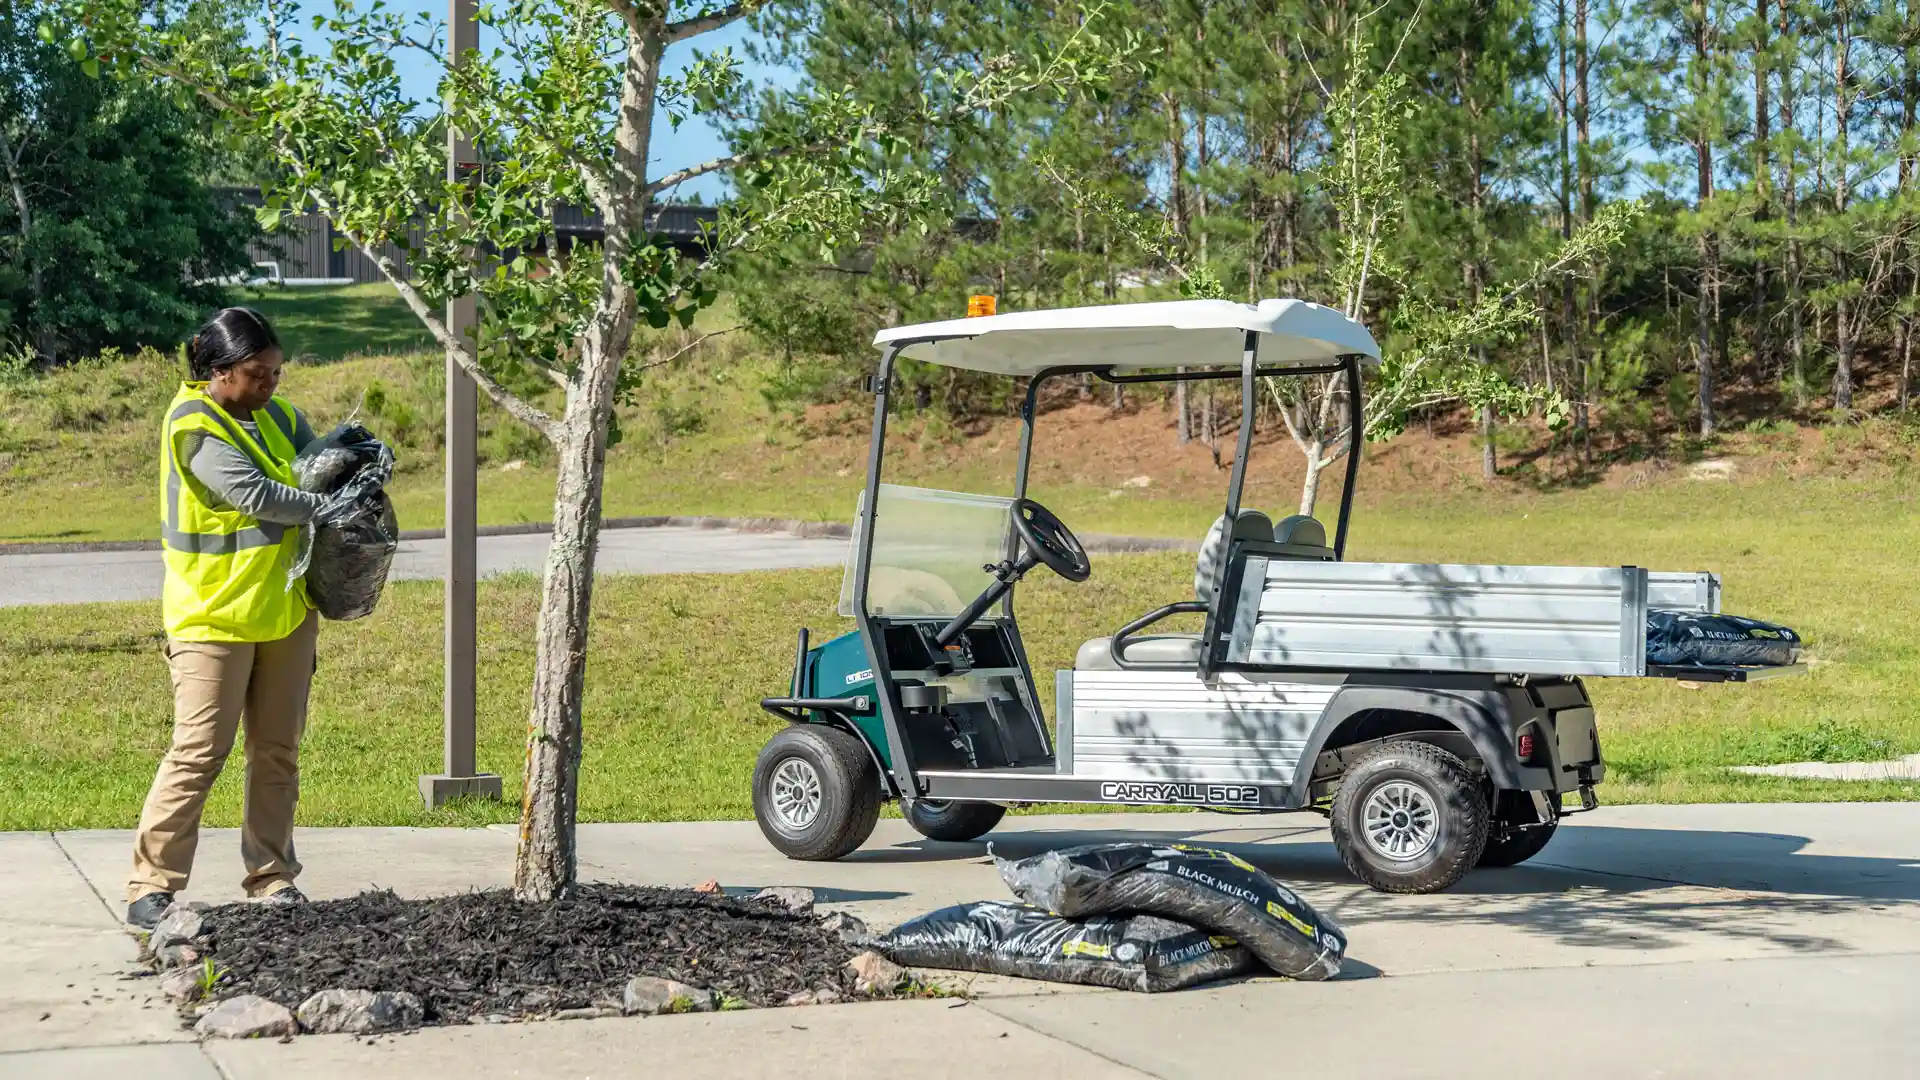 Carryall 502 work utility vehicle with bed for carrying supplies